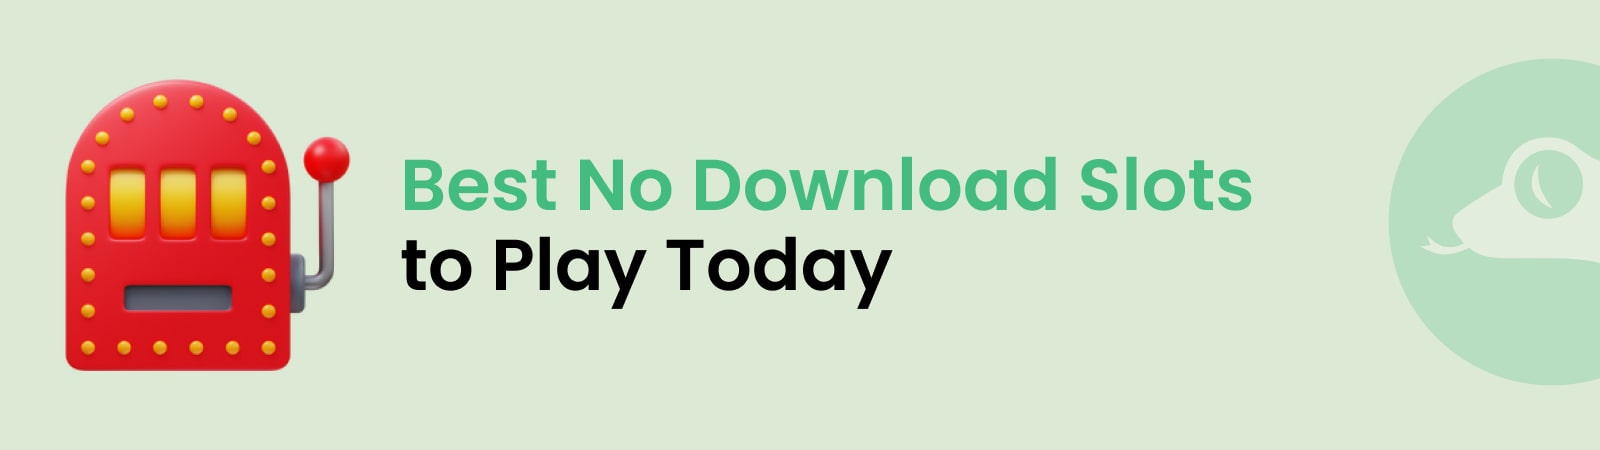 best no download slots to play today